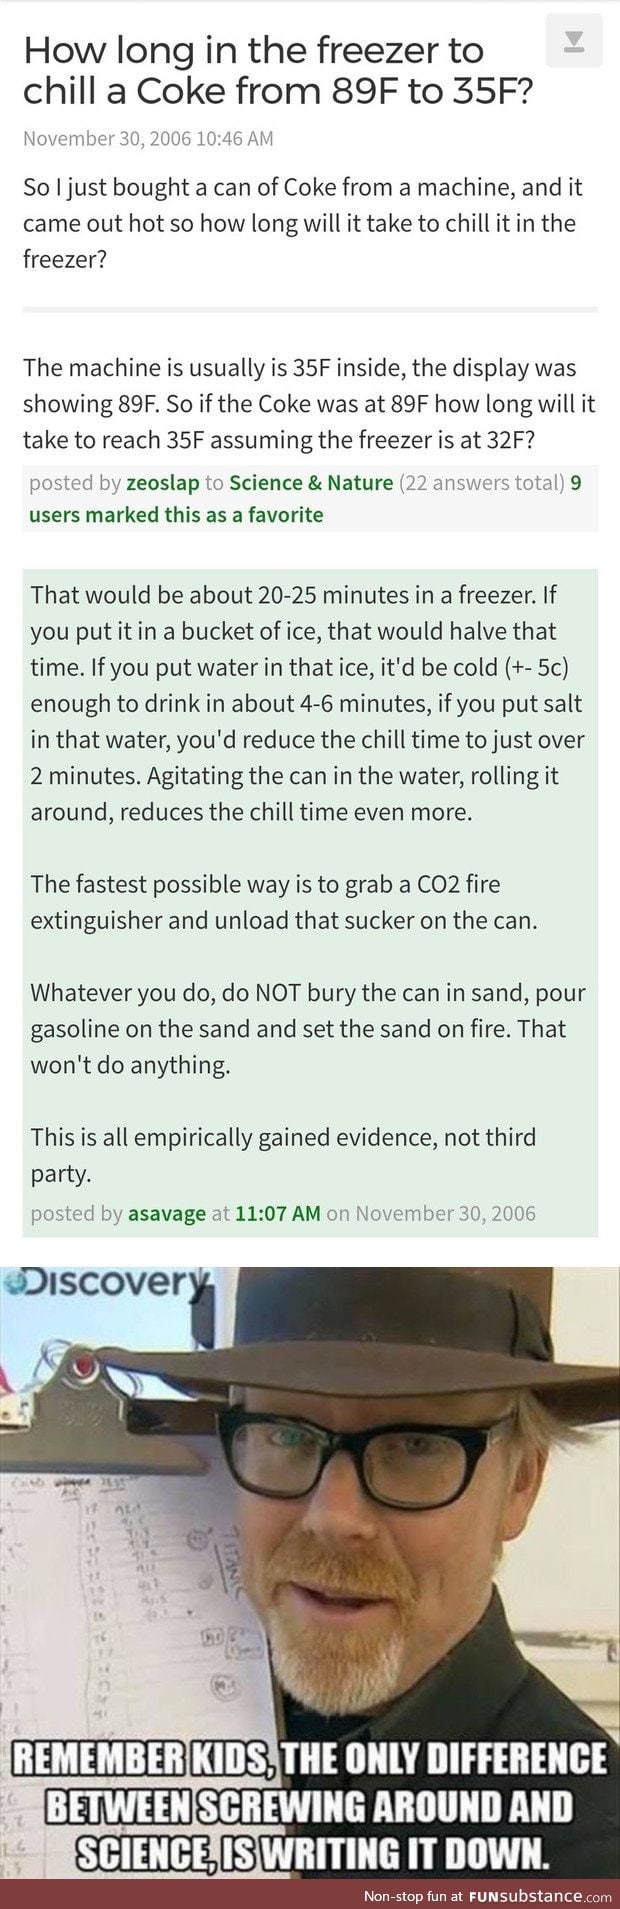 Adam Savage's response to the "Chill my drink" question